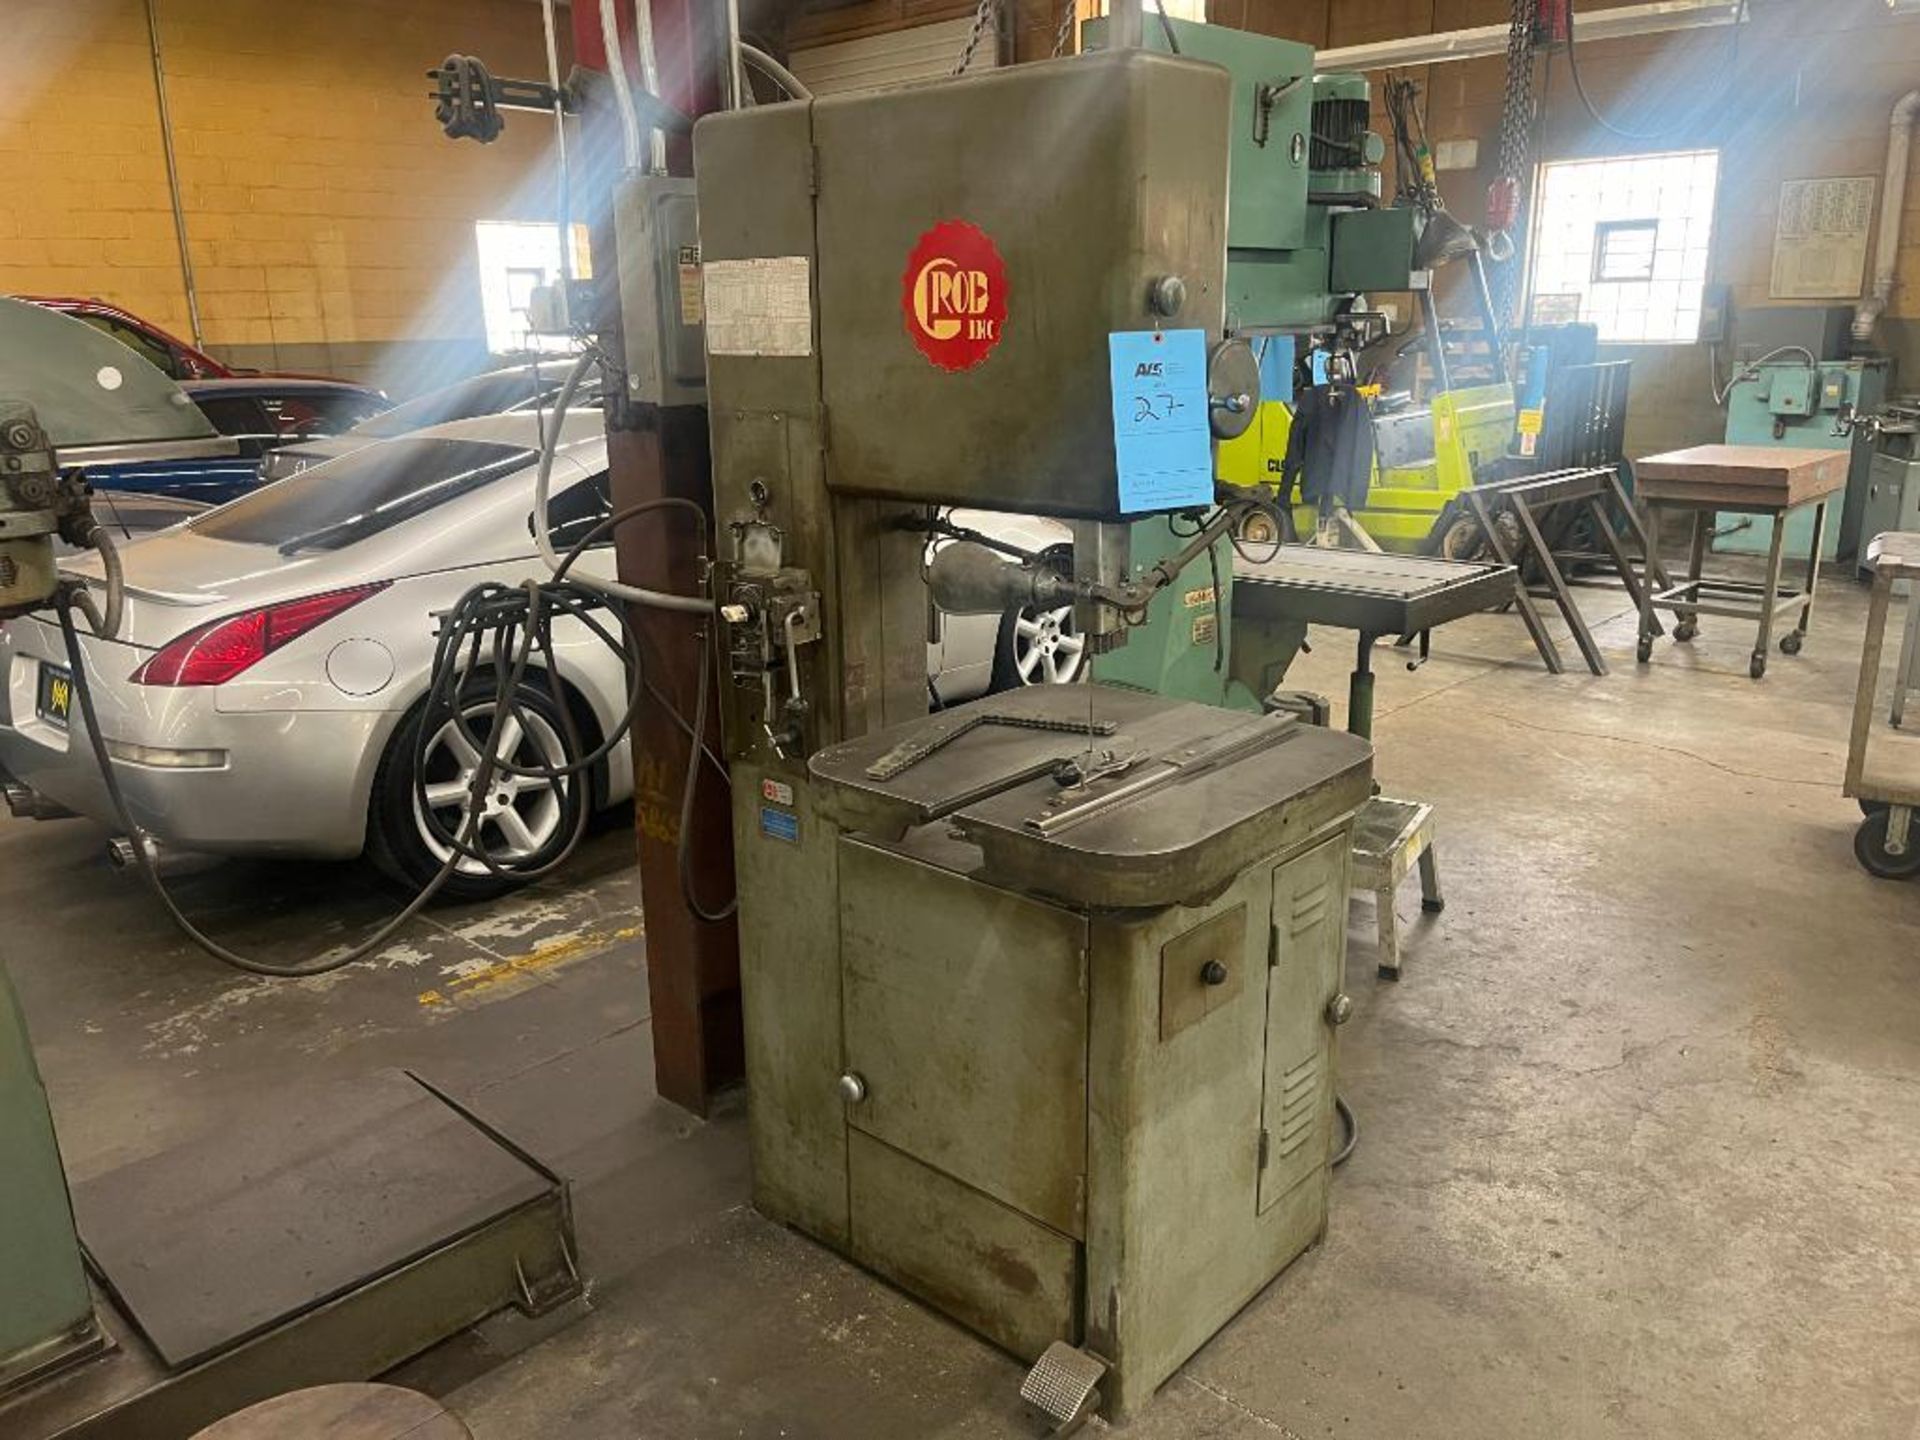 Grob 18" Vertical Band Saw Model NS18, S/N 10187. 24" x 24" Tilting Work Table, with Butt Welder